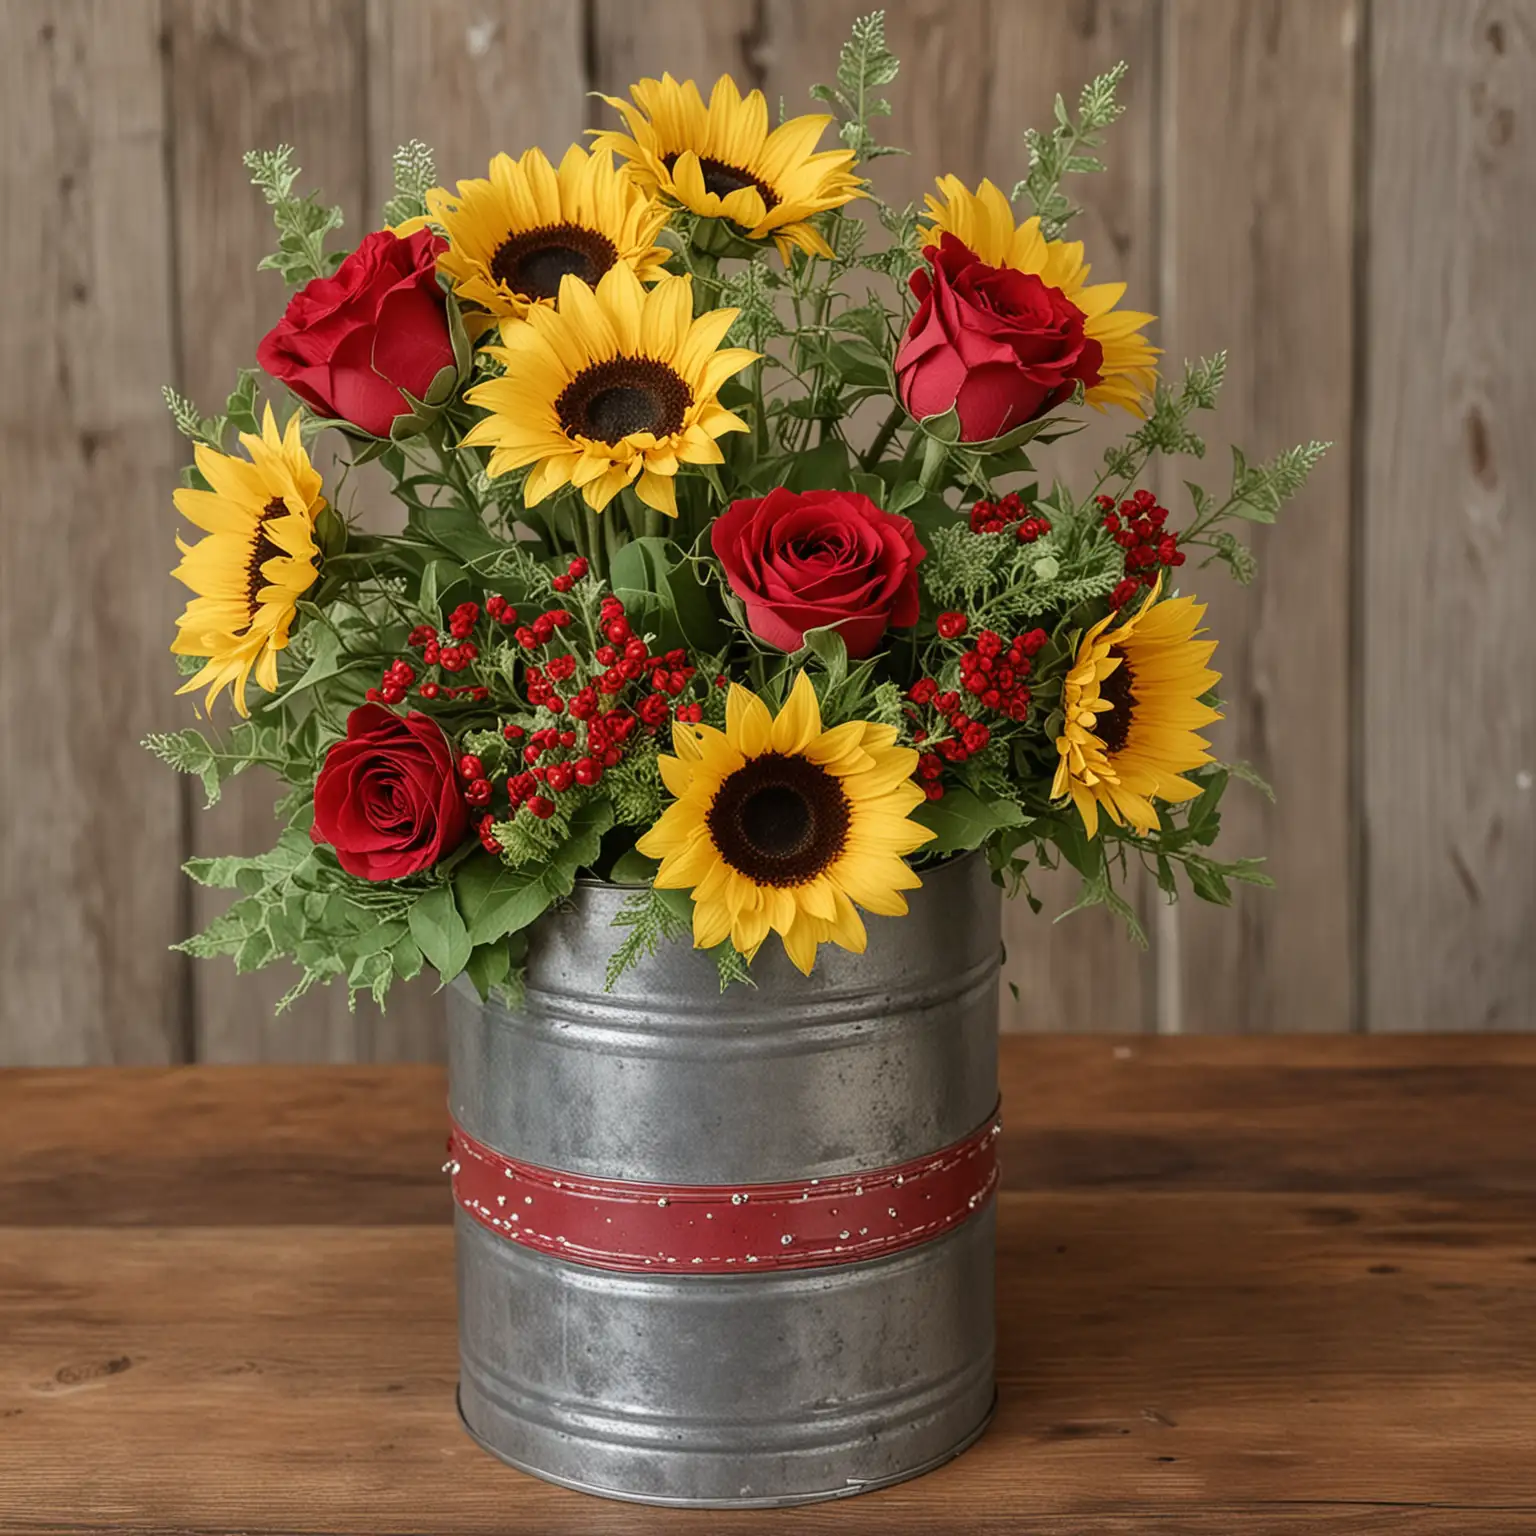 a simple rustic centerpiece with sunflowers and red roses in tin can vase decorated with rustic embellishments